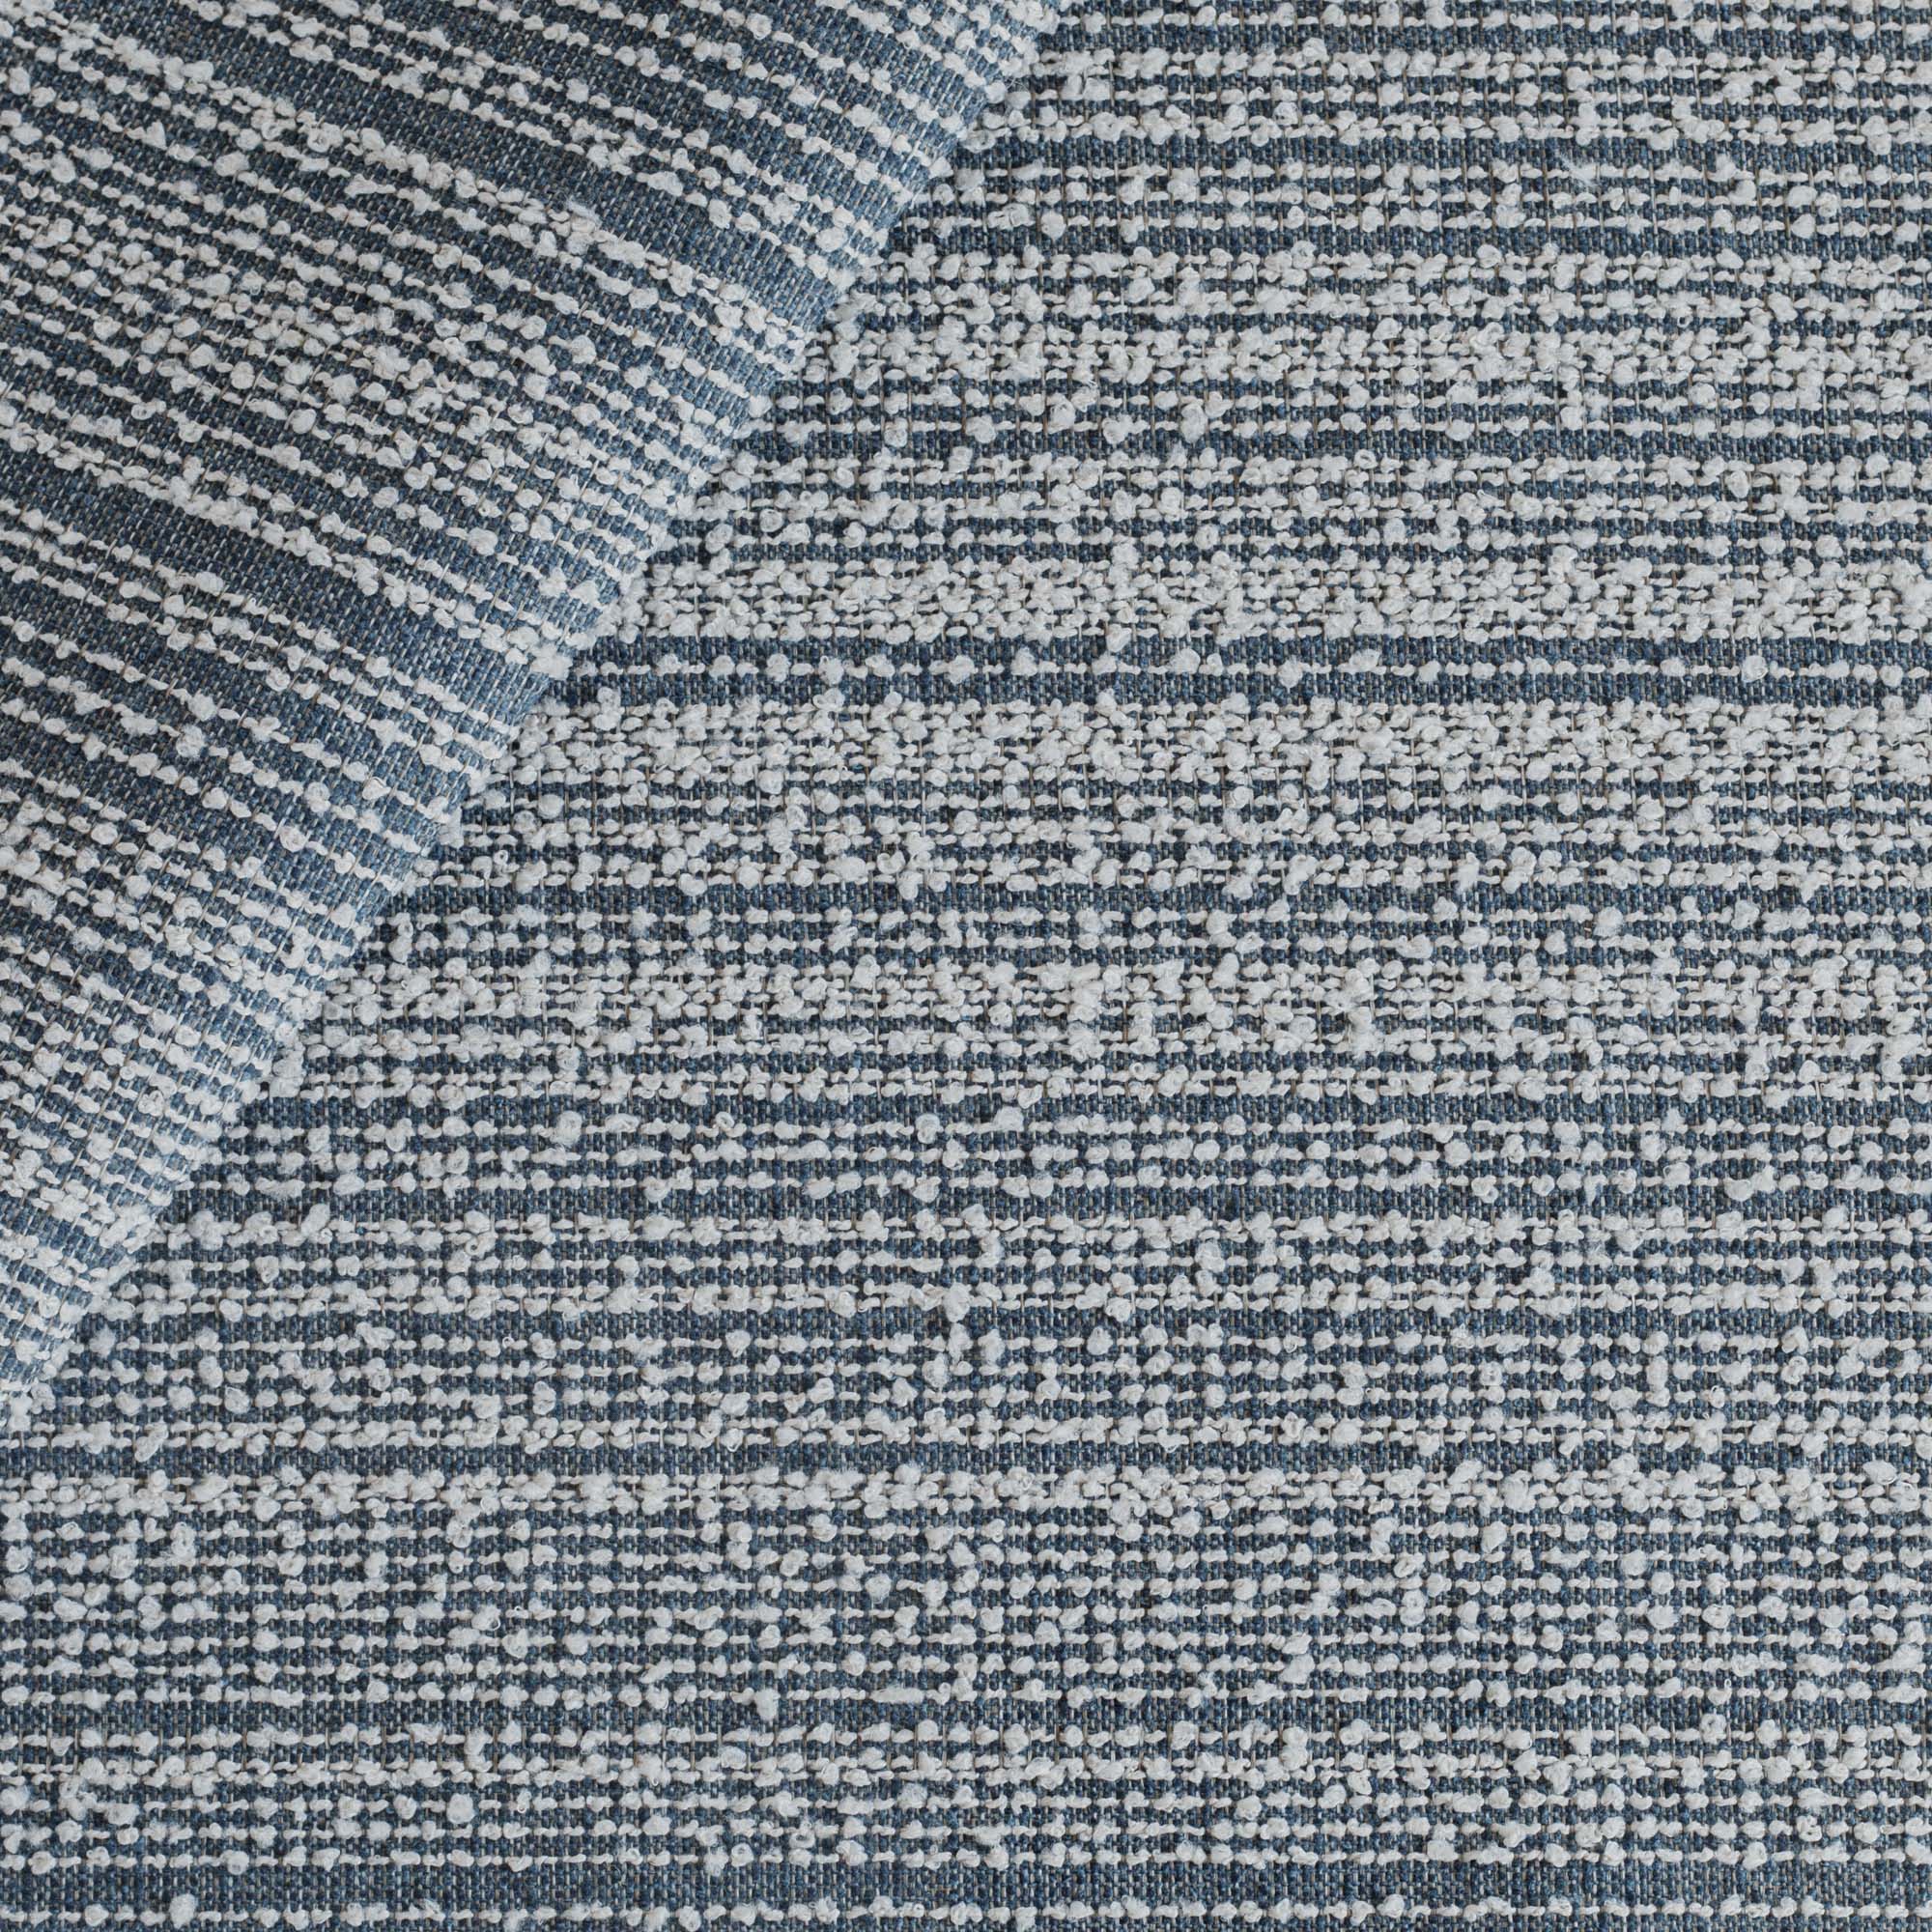 Kos Stripe Chambray, a denim blue with white boucle striped upholstery fabric from Tonic Living 